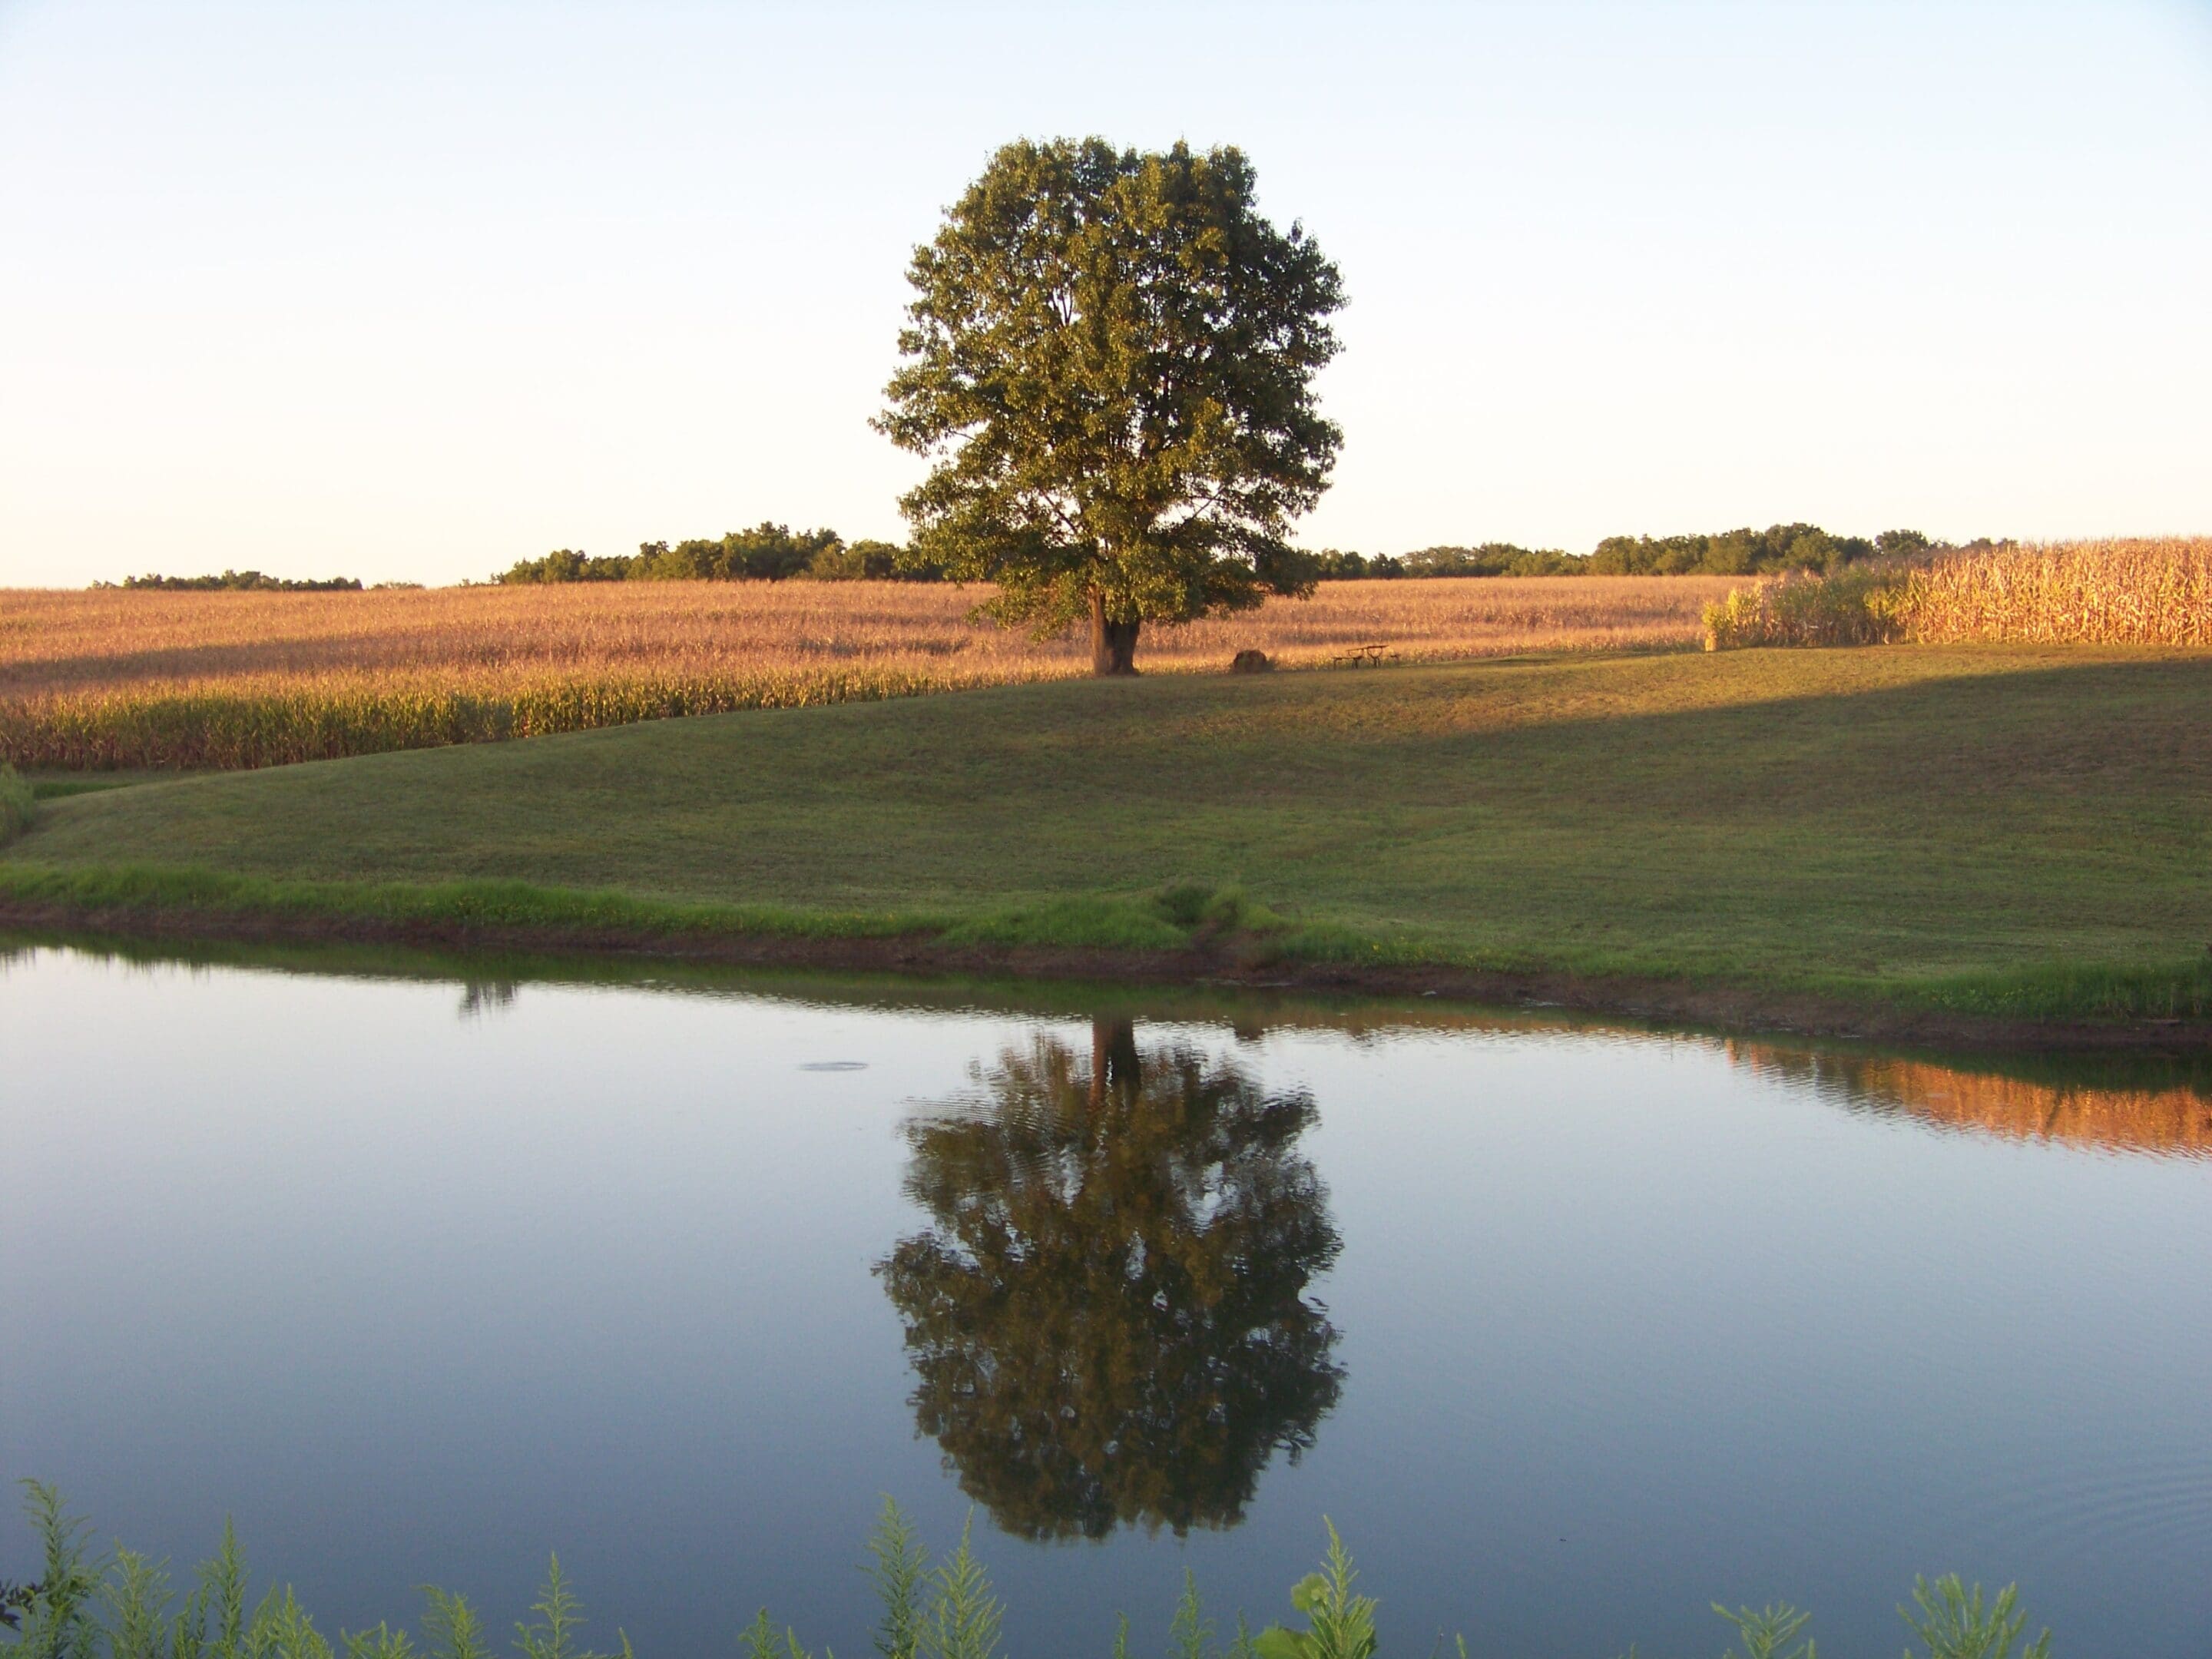 A tree is reflected in the water of a pond.